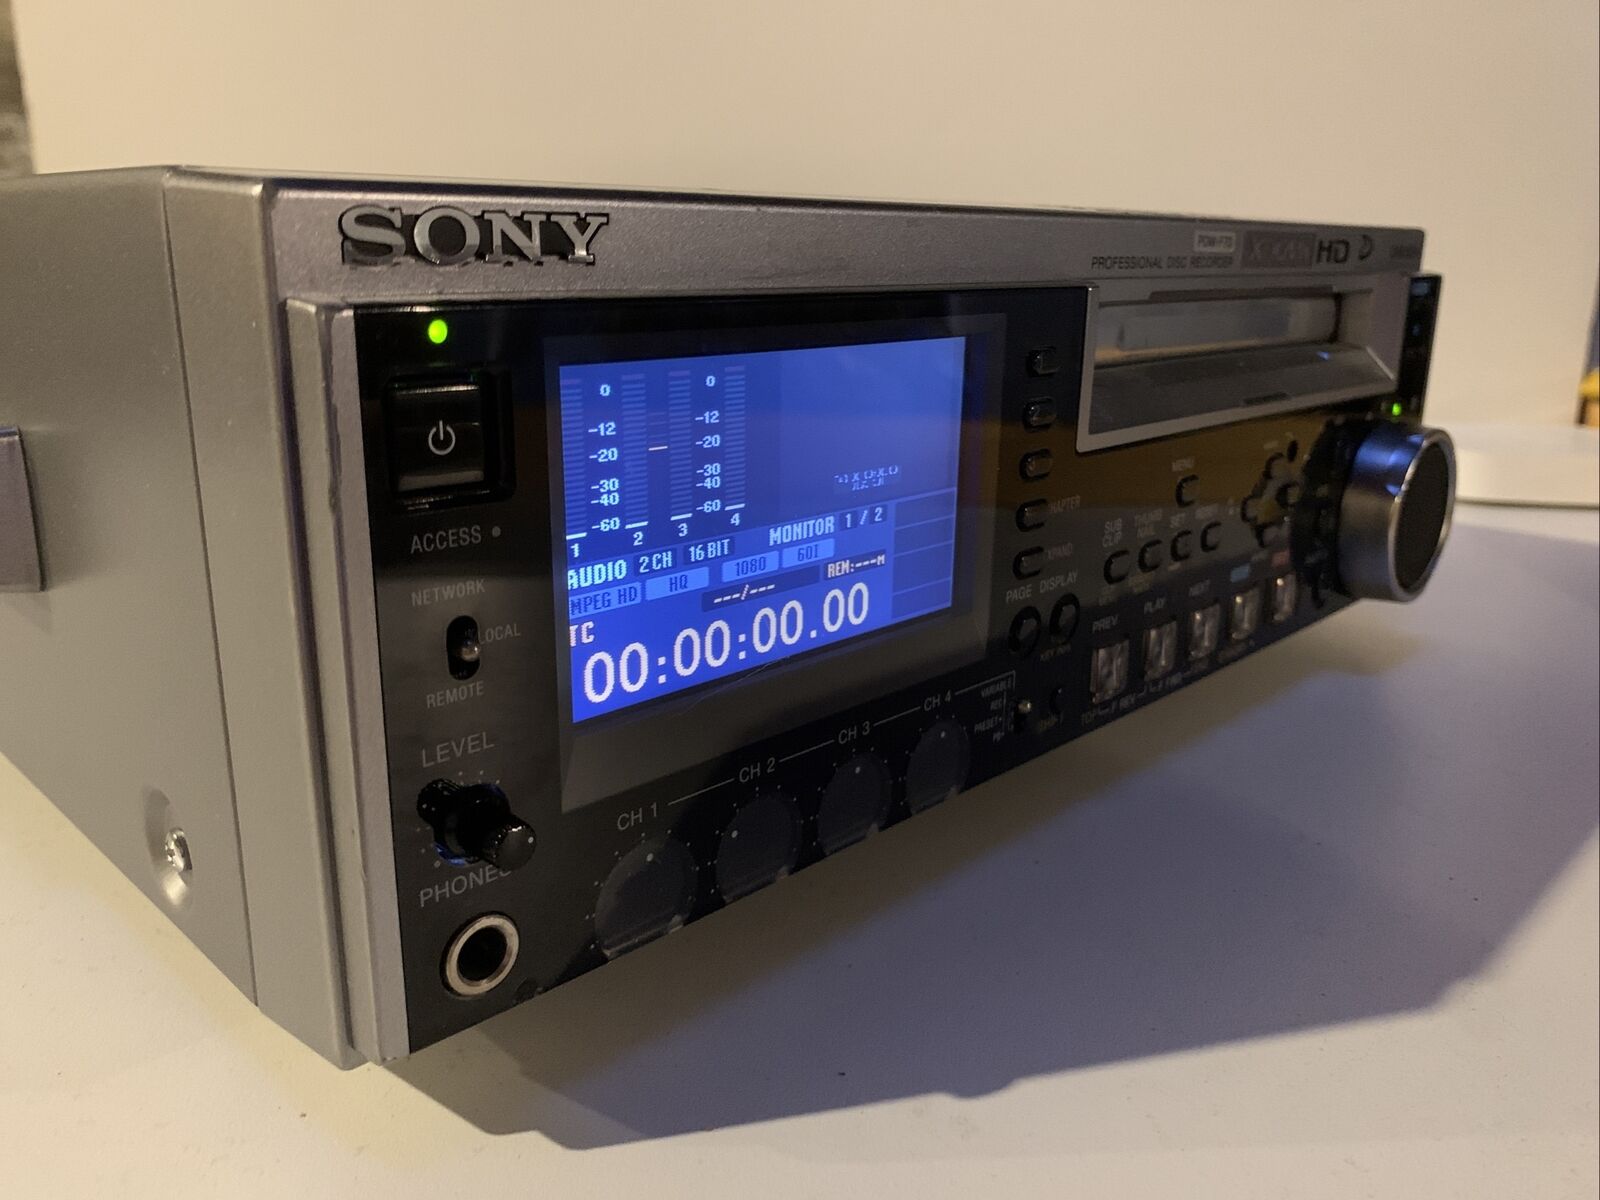 Sony PDW-F70 HD XDCAM Professional Disc Recorder WORKING Low 175